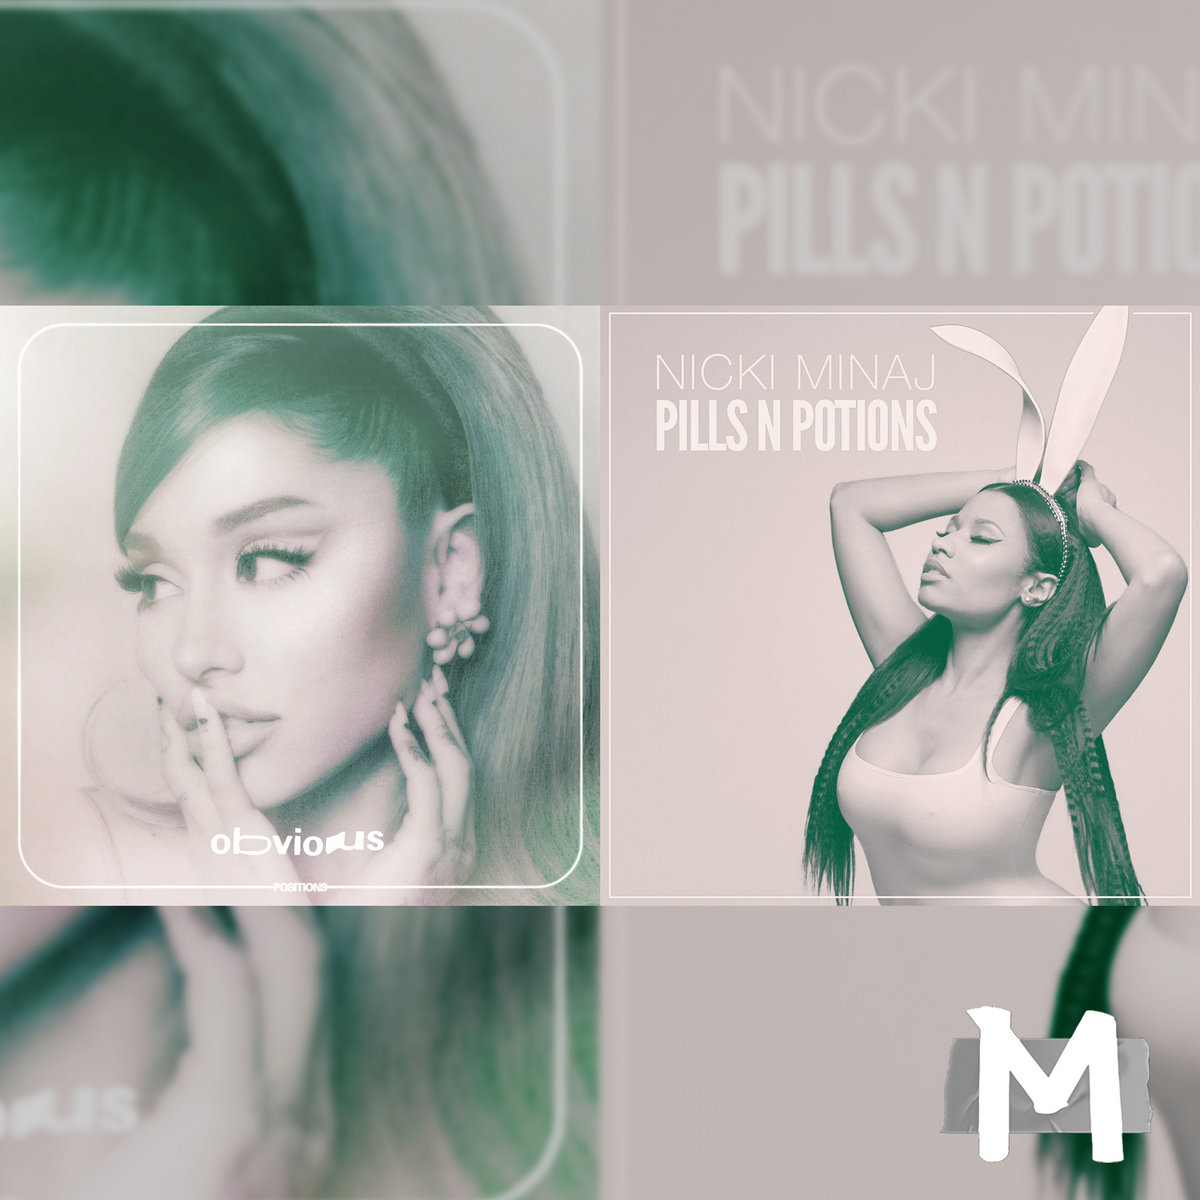 pills and potions free mp3 download